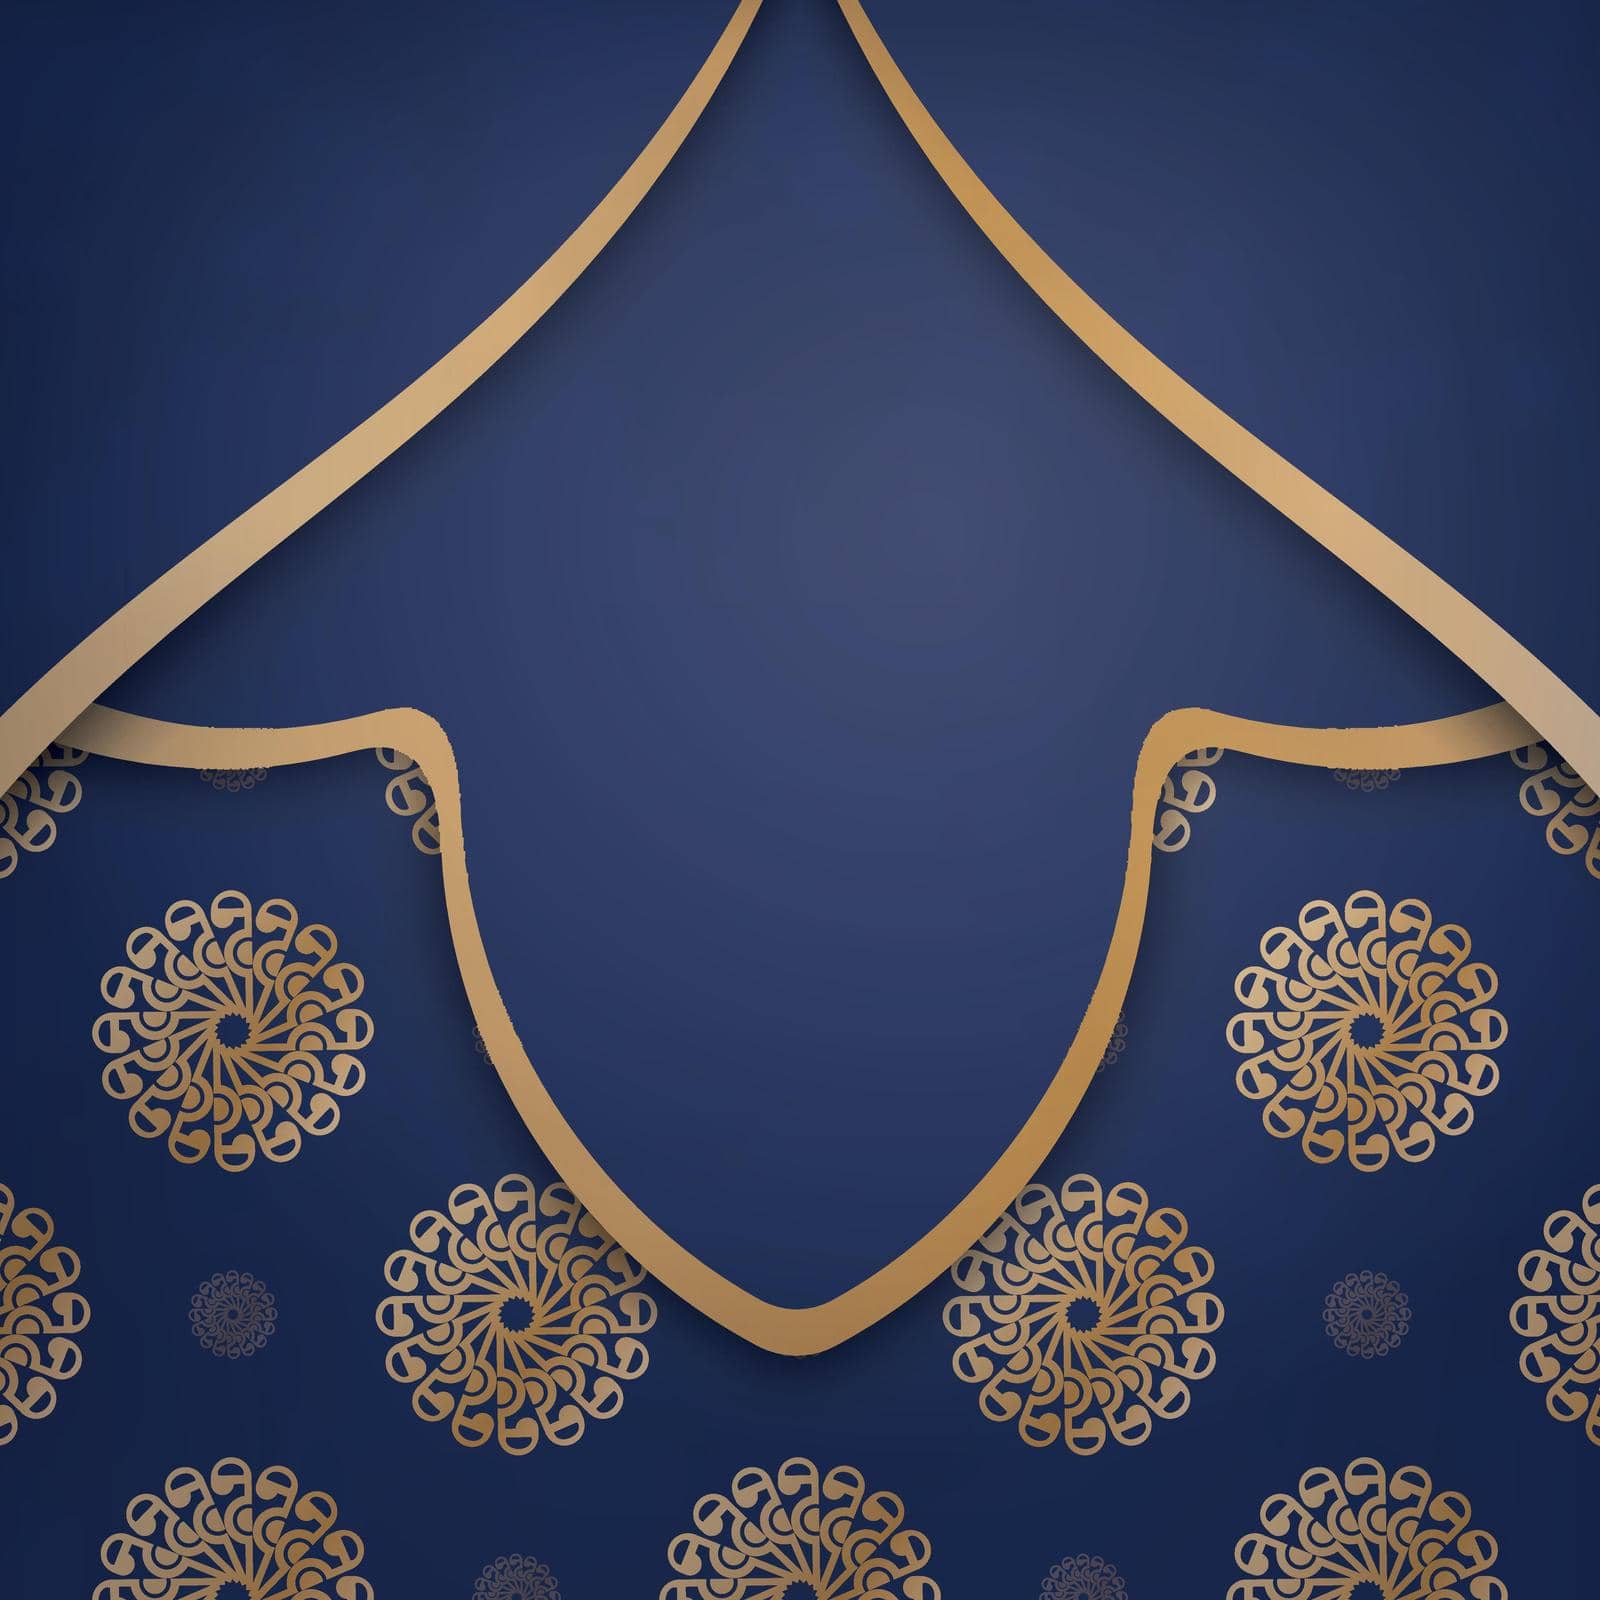 Business card template in dark blue with luxurious gold ornaments for your brand.